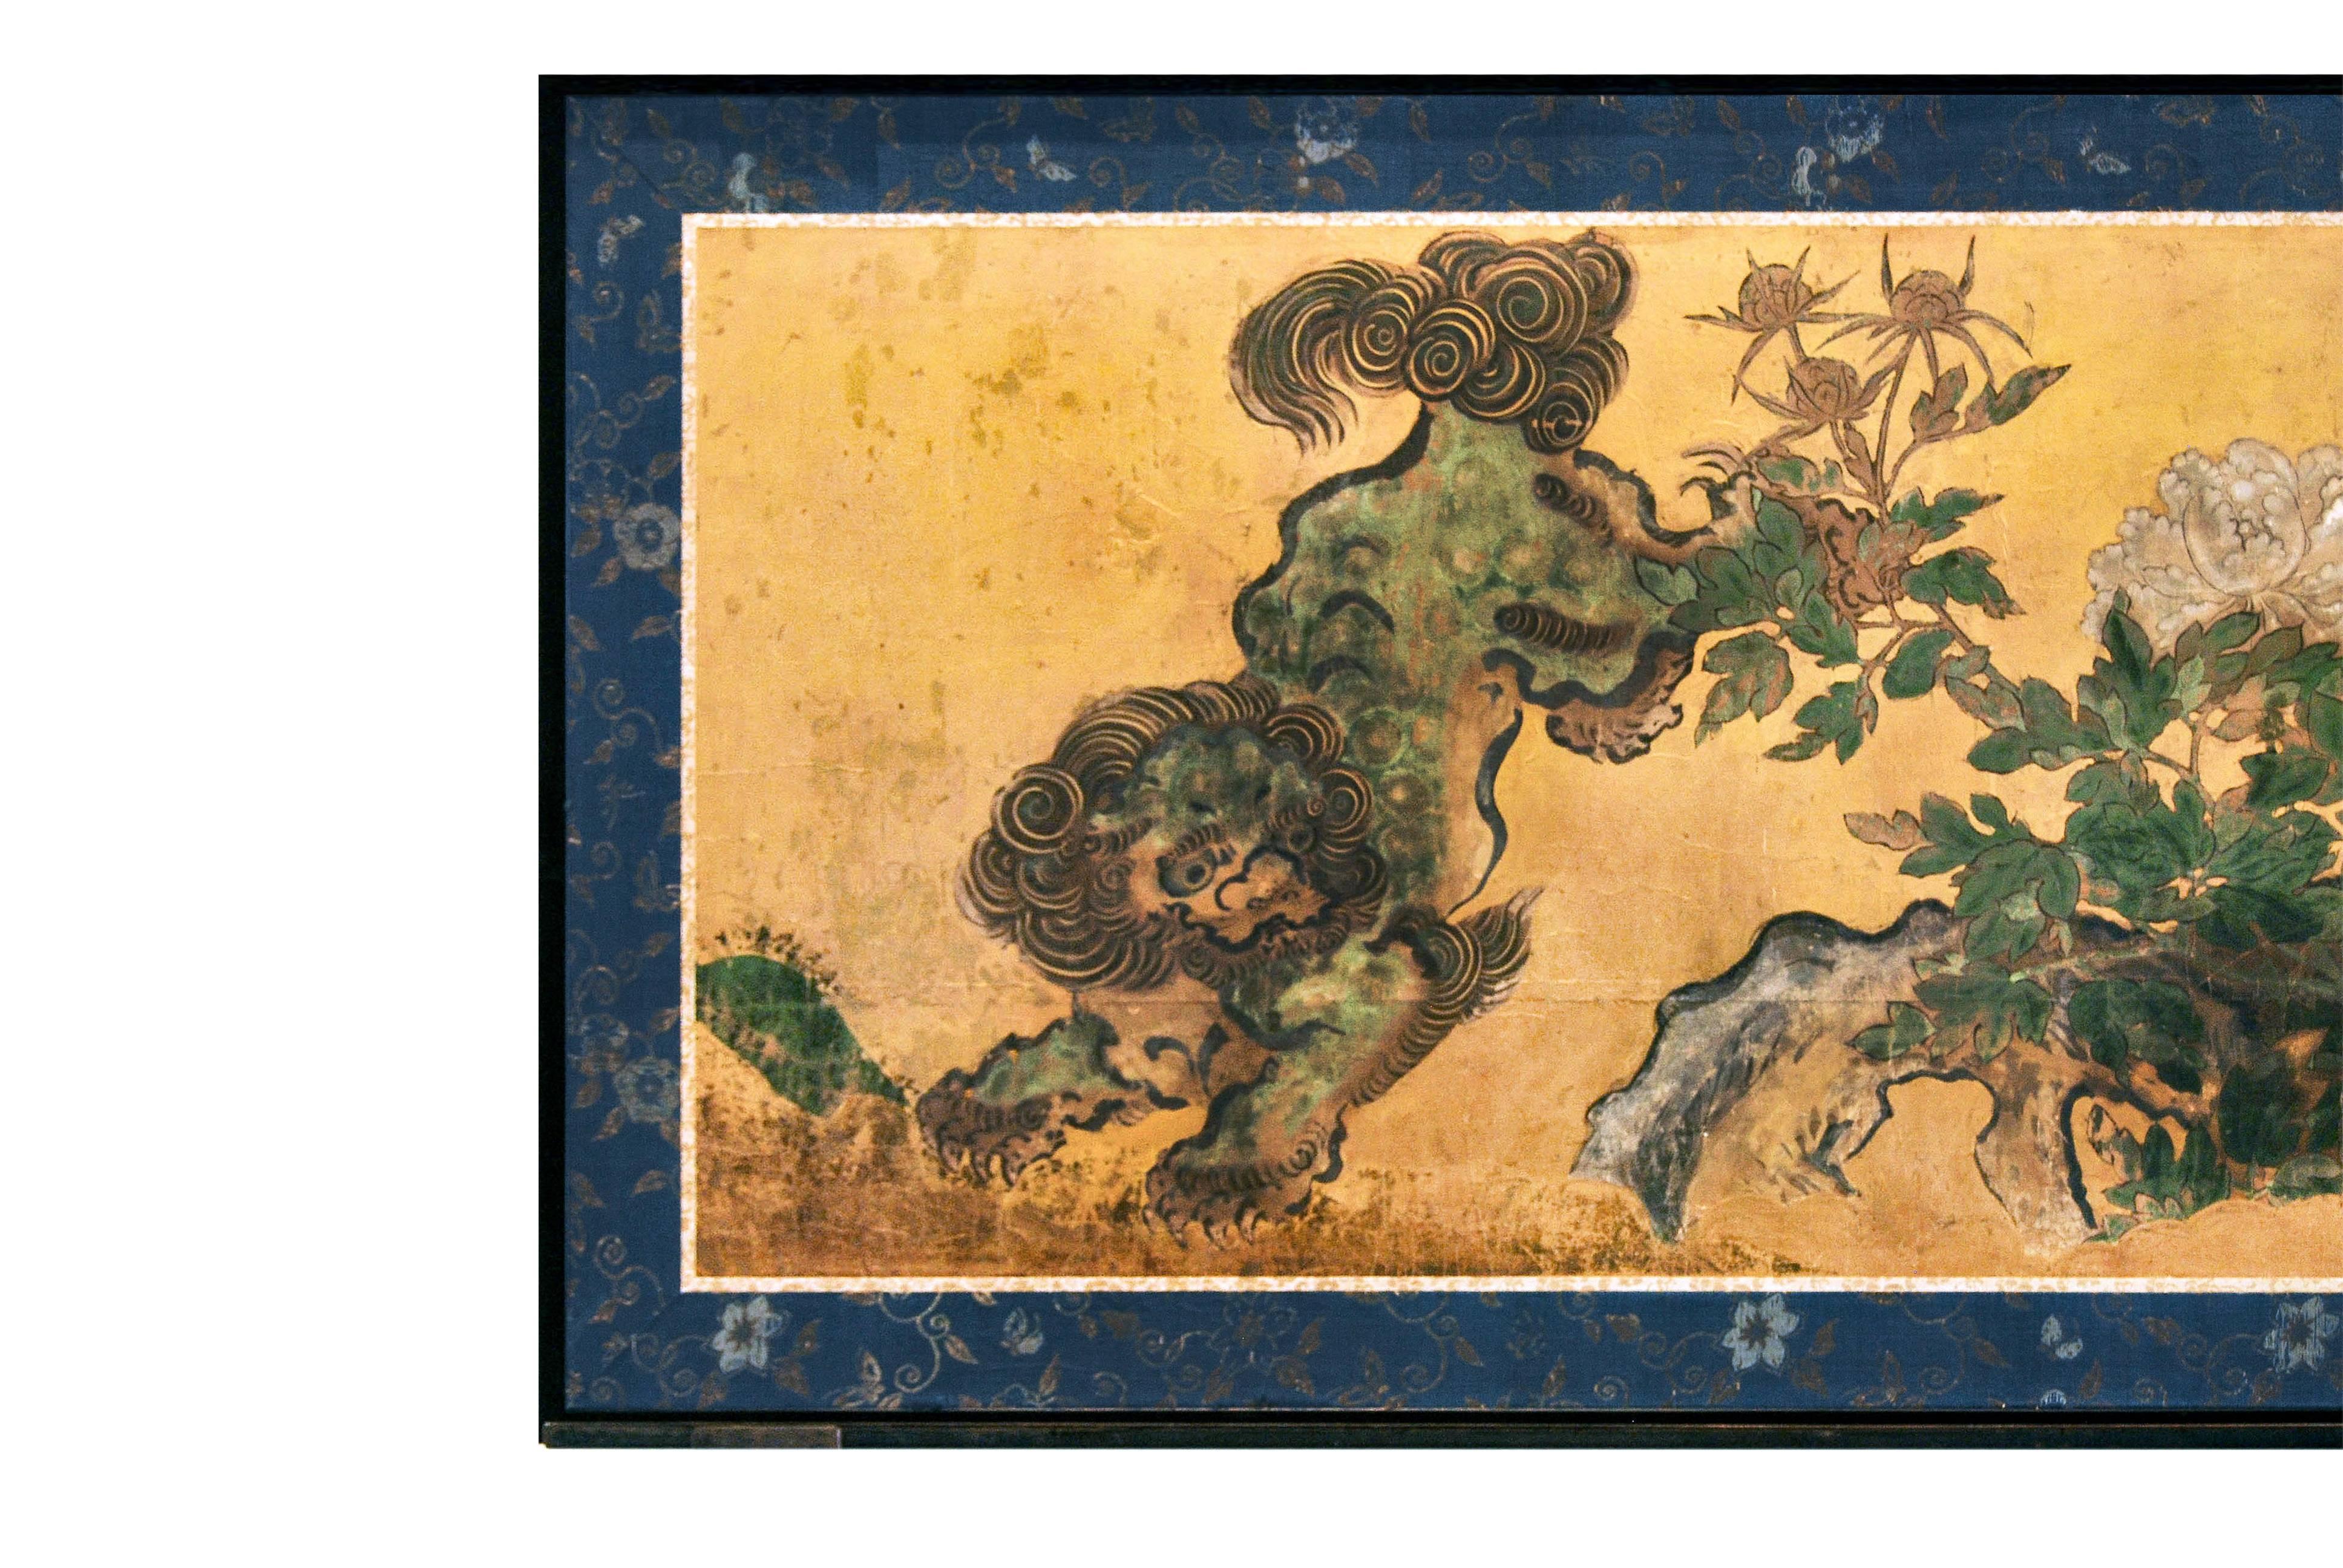 Antique Japanese Kano school two fold screen with a well painted scene depicting a pair of 'shi-shi' Buddhist guardian lions in animated poses frolicking amidst a rocky landscape interspersed with white tree peony flowers, early Edo period, circa